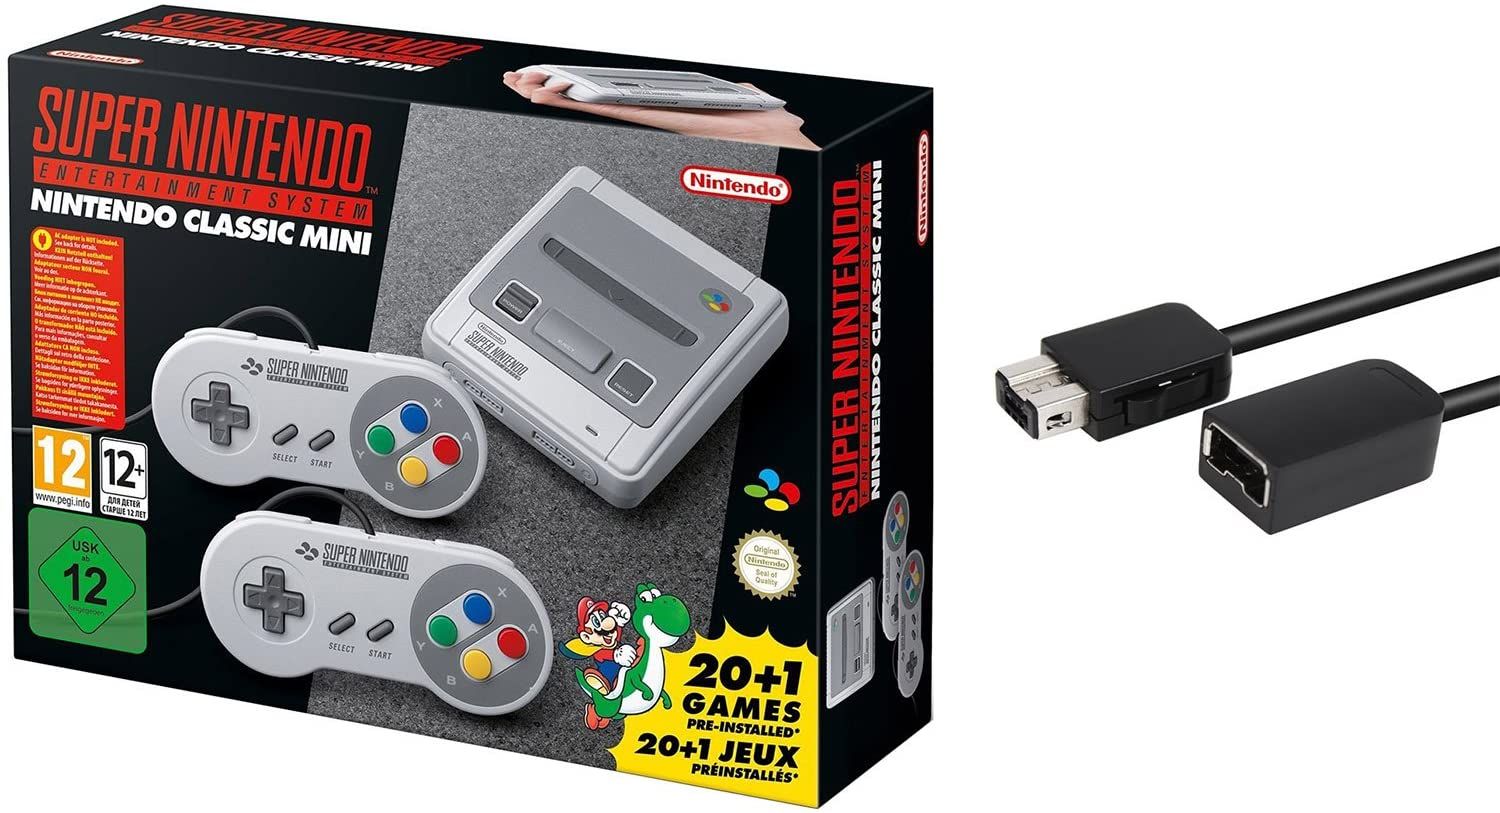 Packaging for Super NES Classic